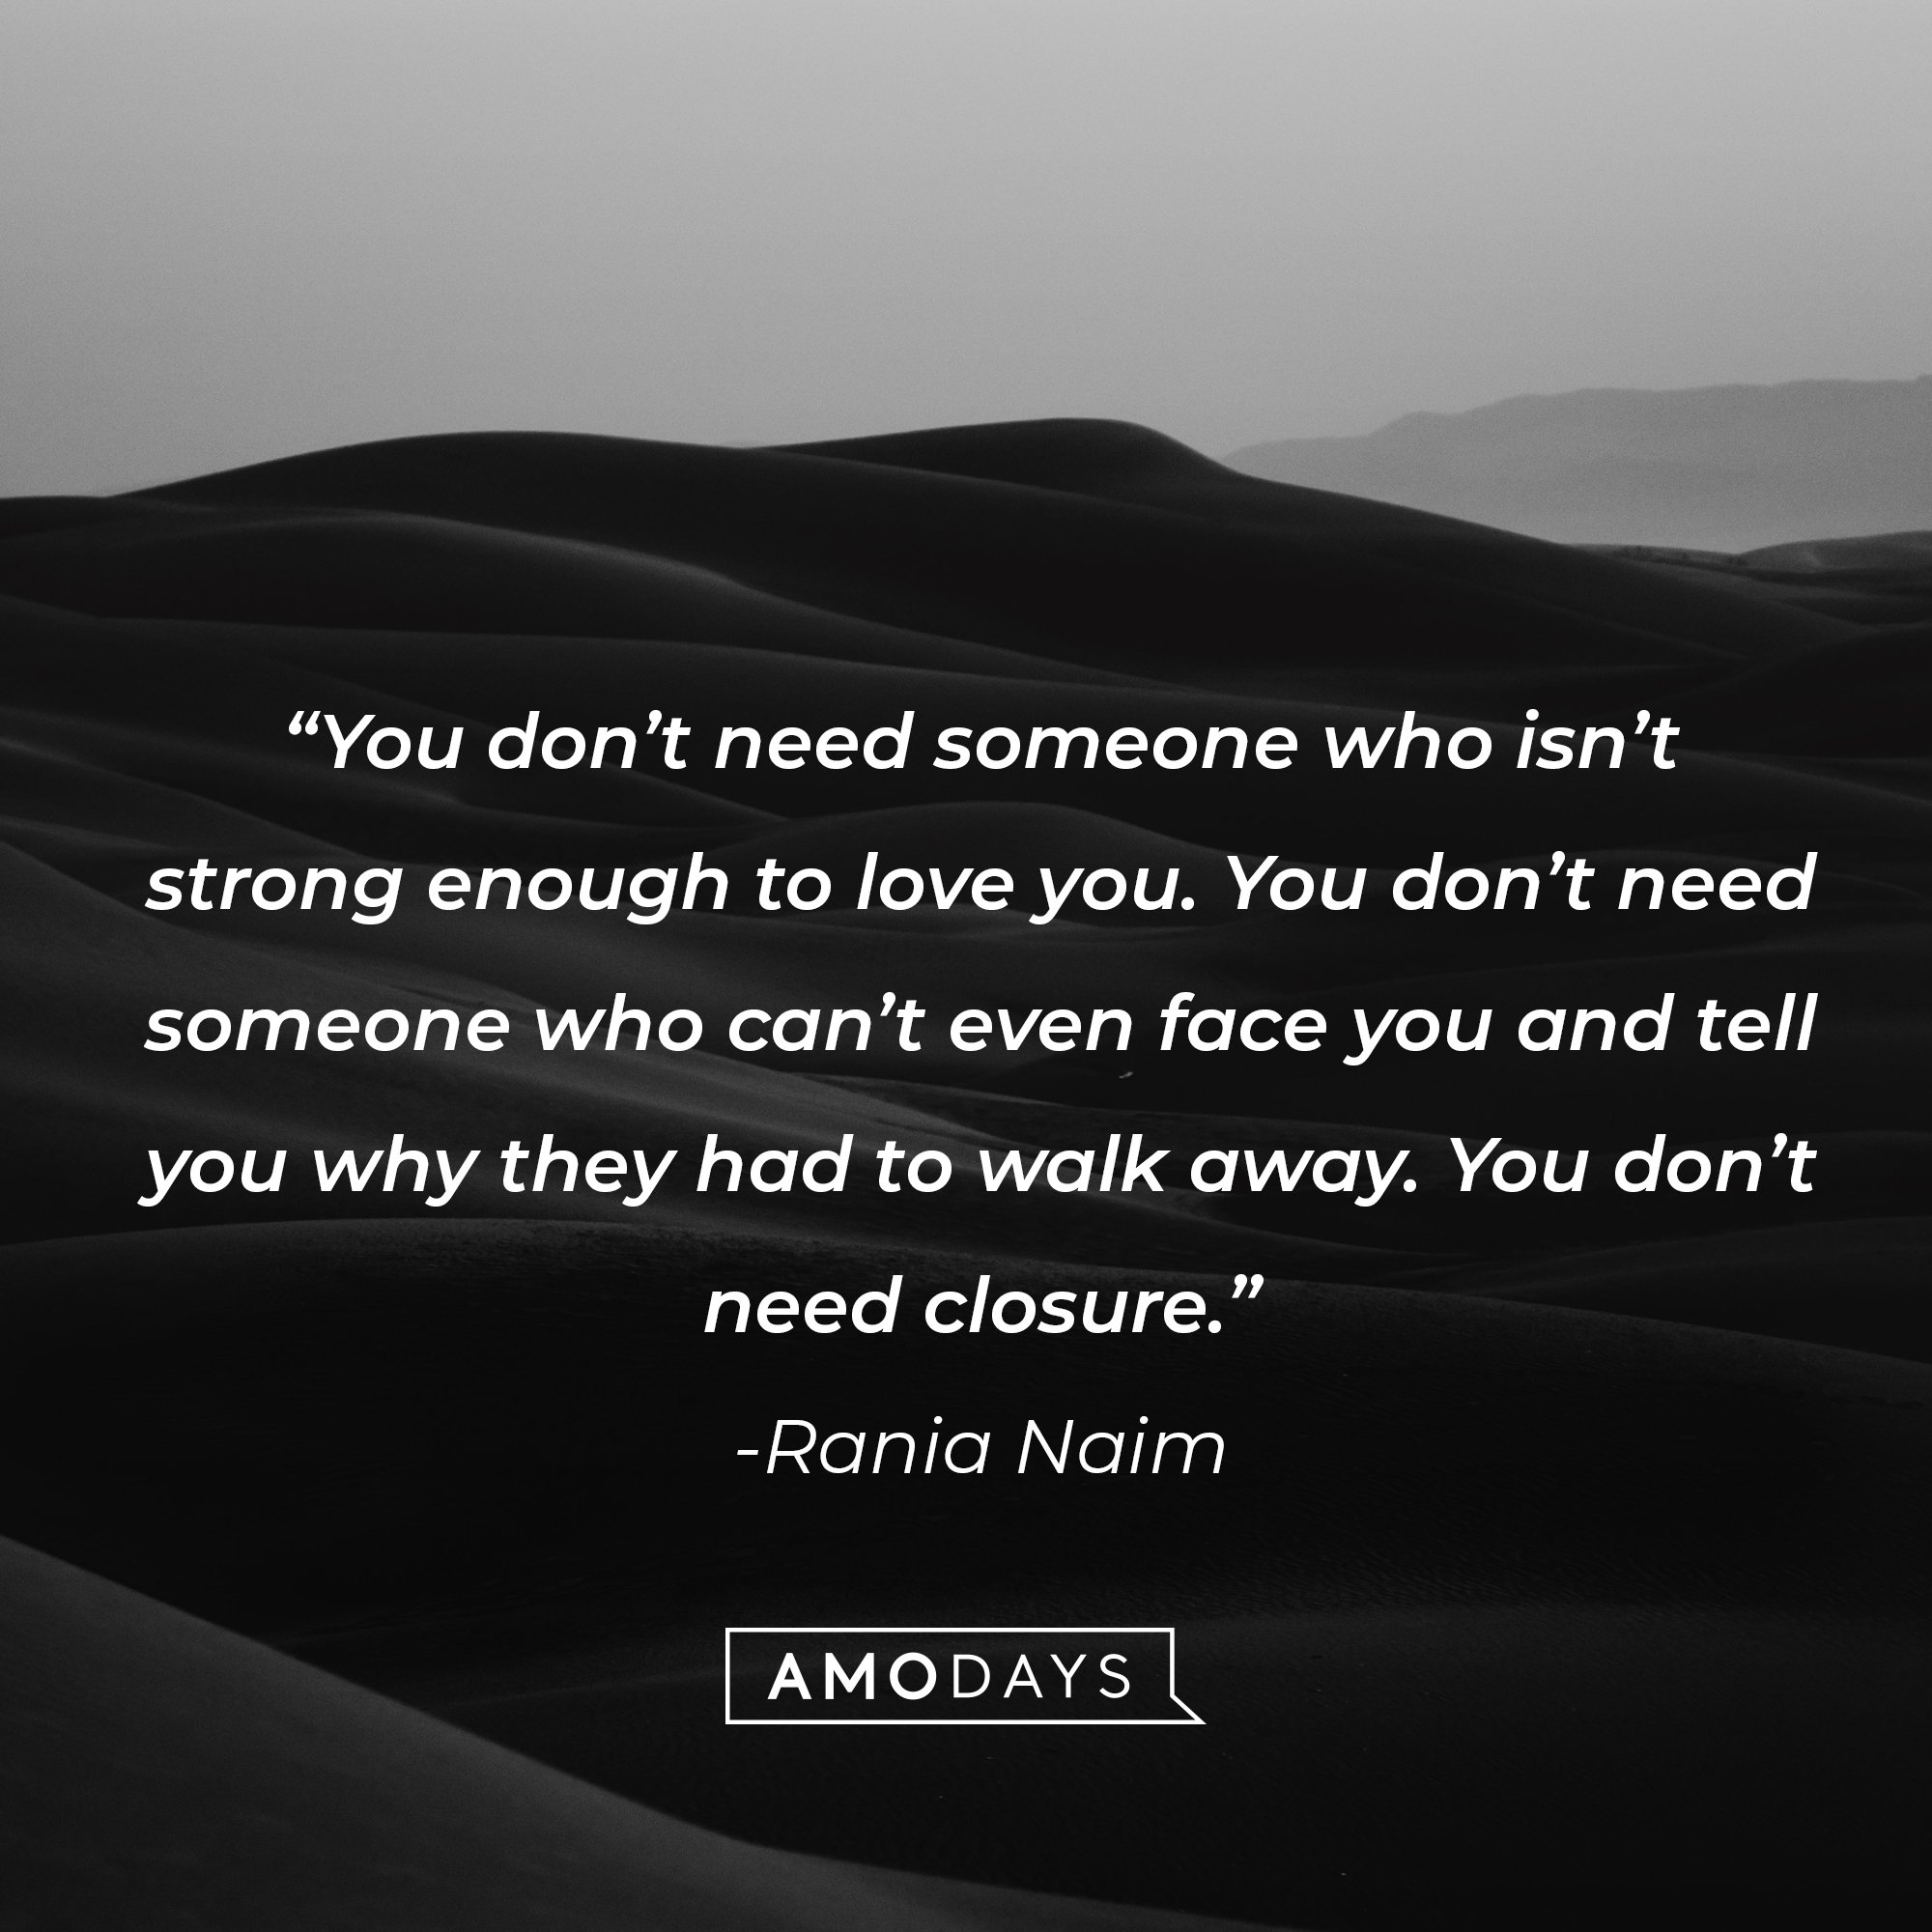 Rania Naim's quote: "You don't need someone who isn't strong enough to love you. You don't need someone who can't even face you and tell you why they had to walk away. You don't need closure." | Image: AmoDays